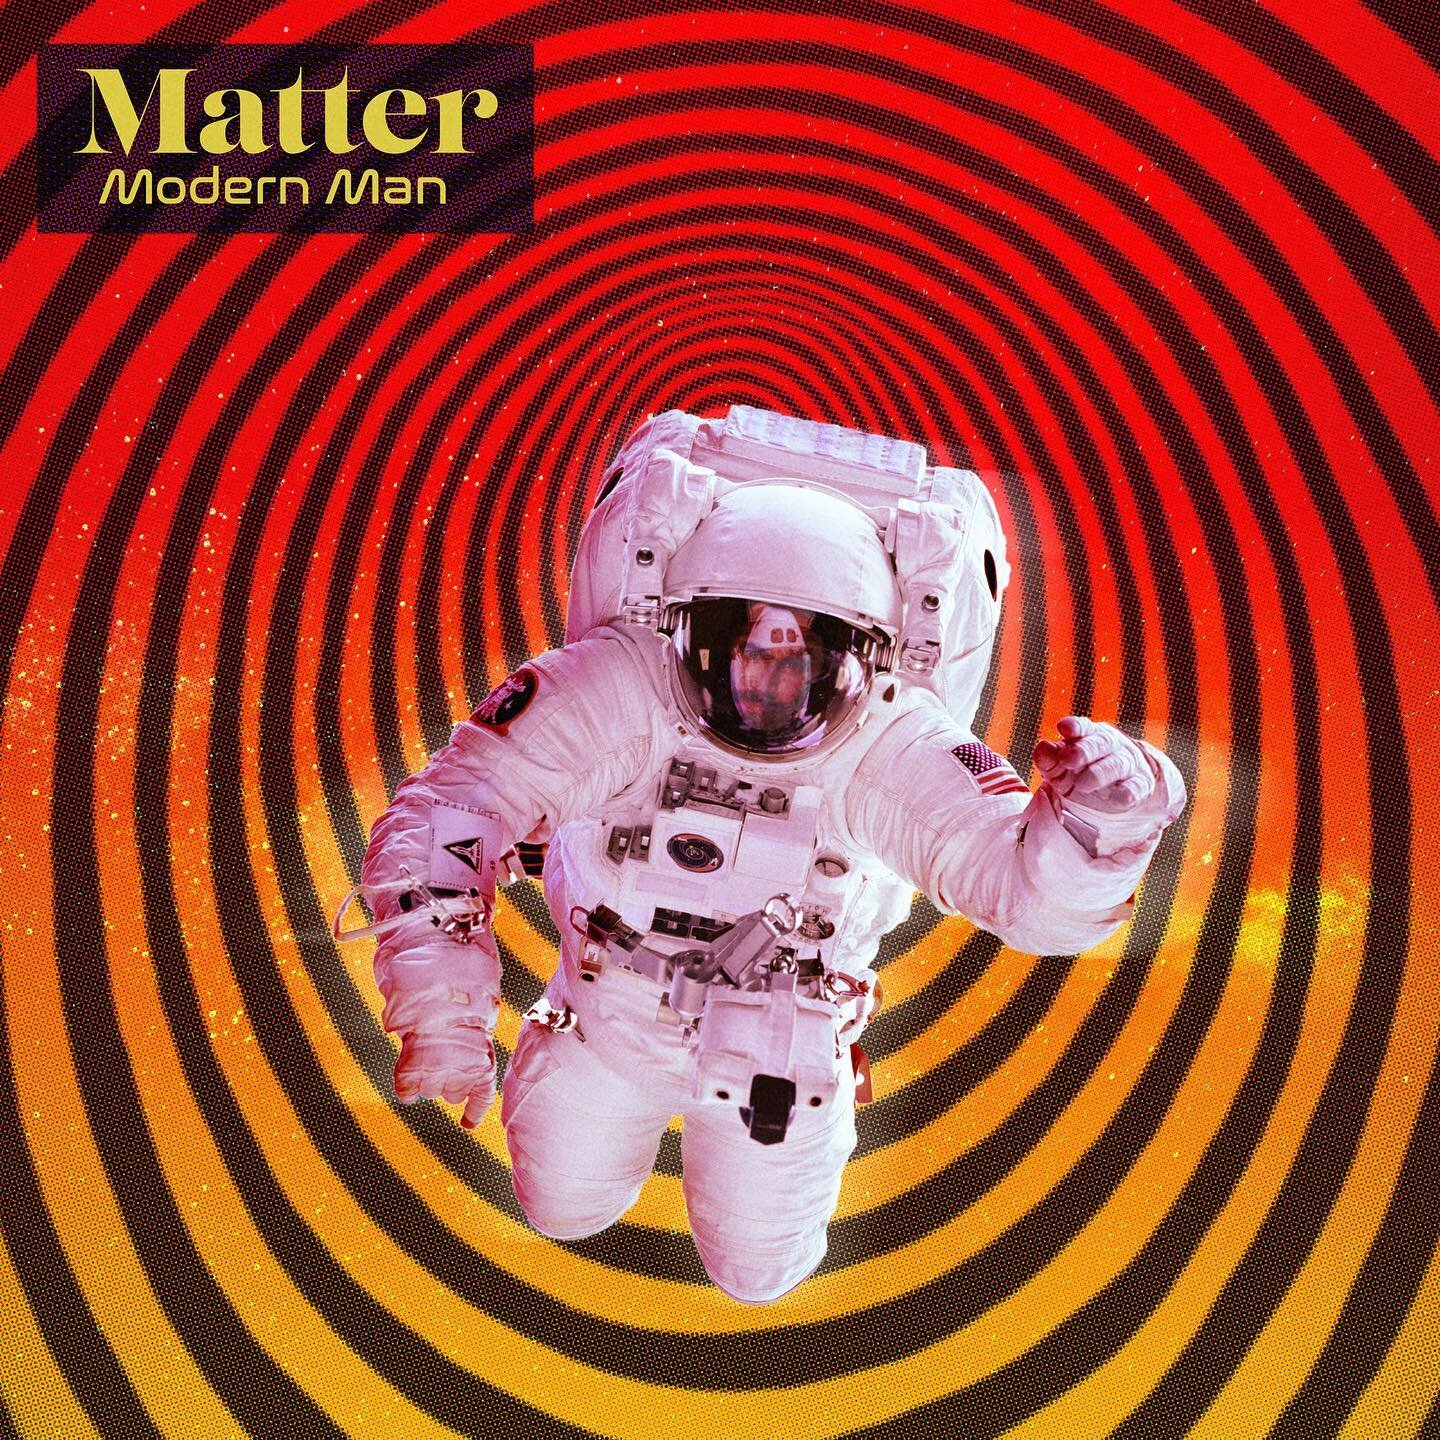 I made this for @mattermusic_  and his Modern Man single. I&rsquo;m a fan of space movies, so I had a lot of fun making this one. It&rsquo;s a little bit twilight zone and a little bit 2001 Space Odyssey. I&rsquo;ve made a bunch of covers for Matter 